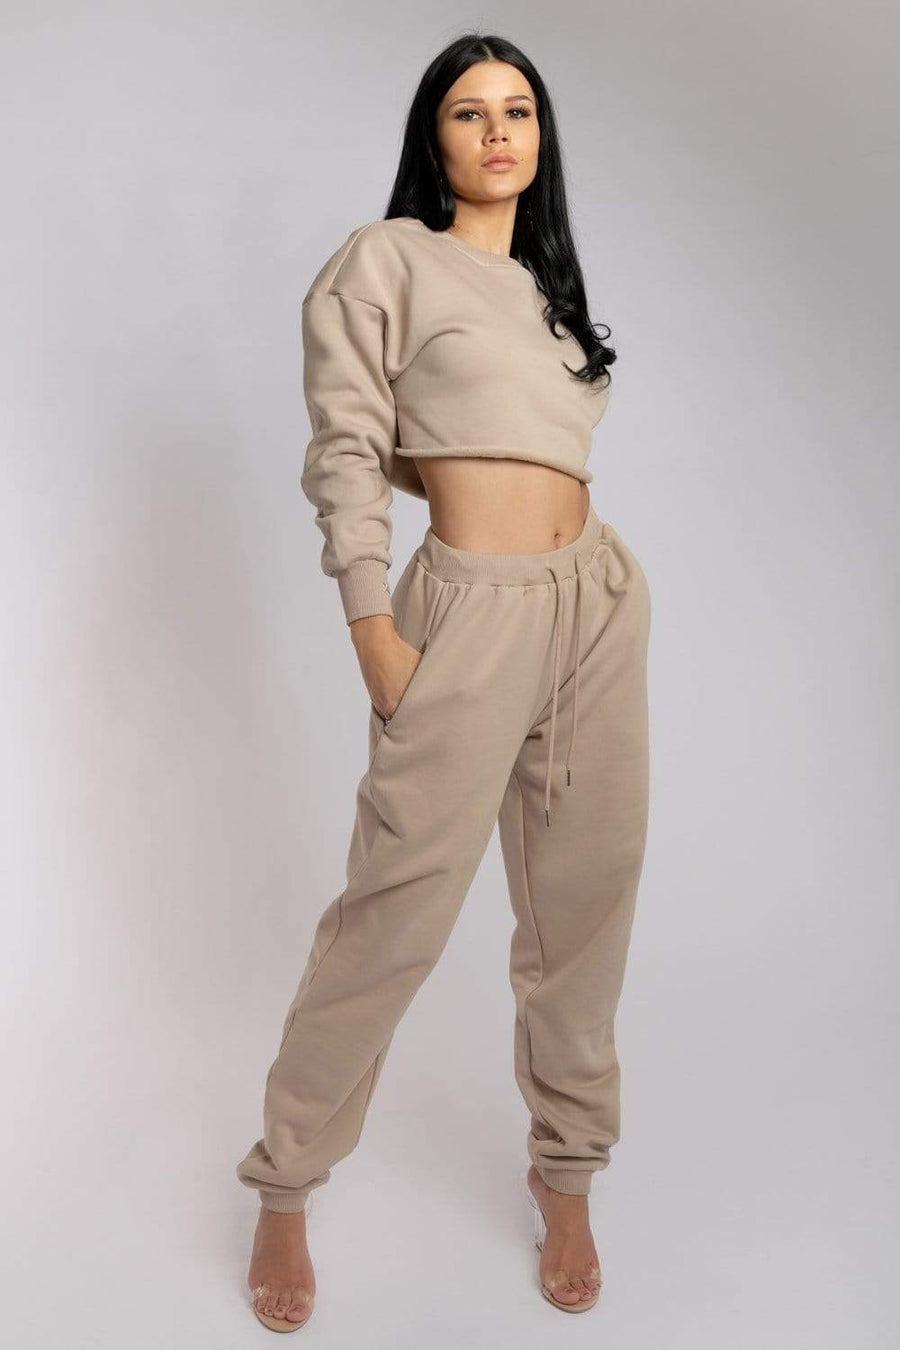 Oversized Jogger Bottoms - Fawn Jogger bottoms